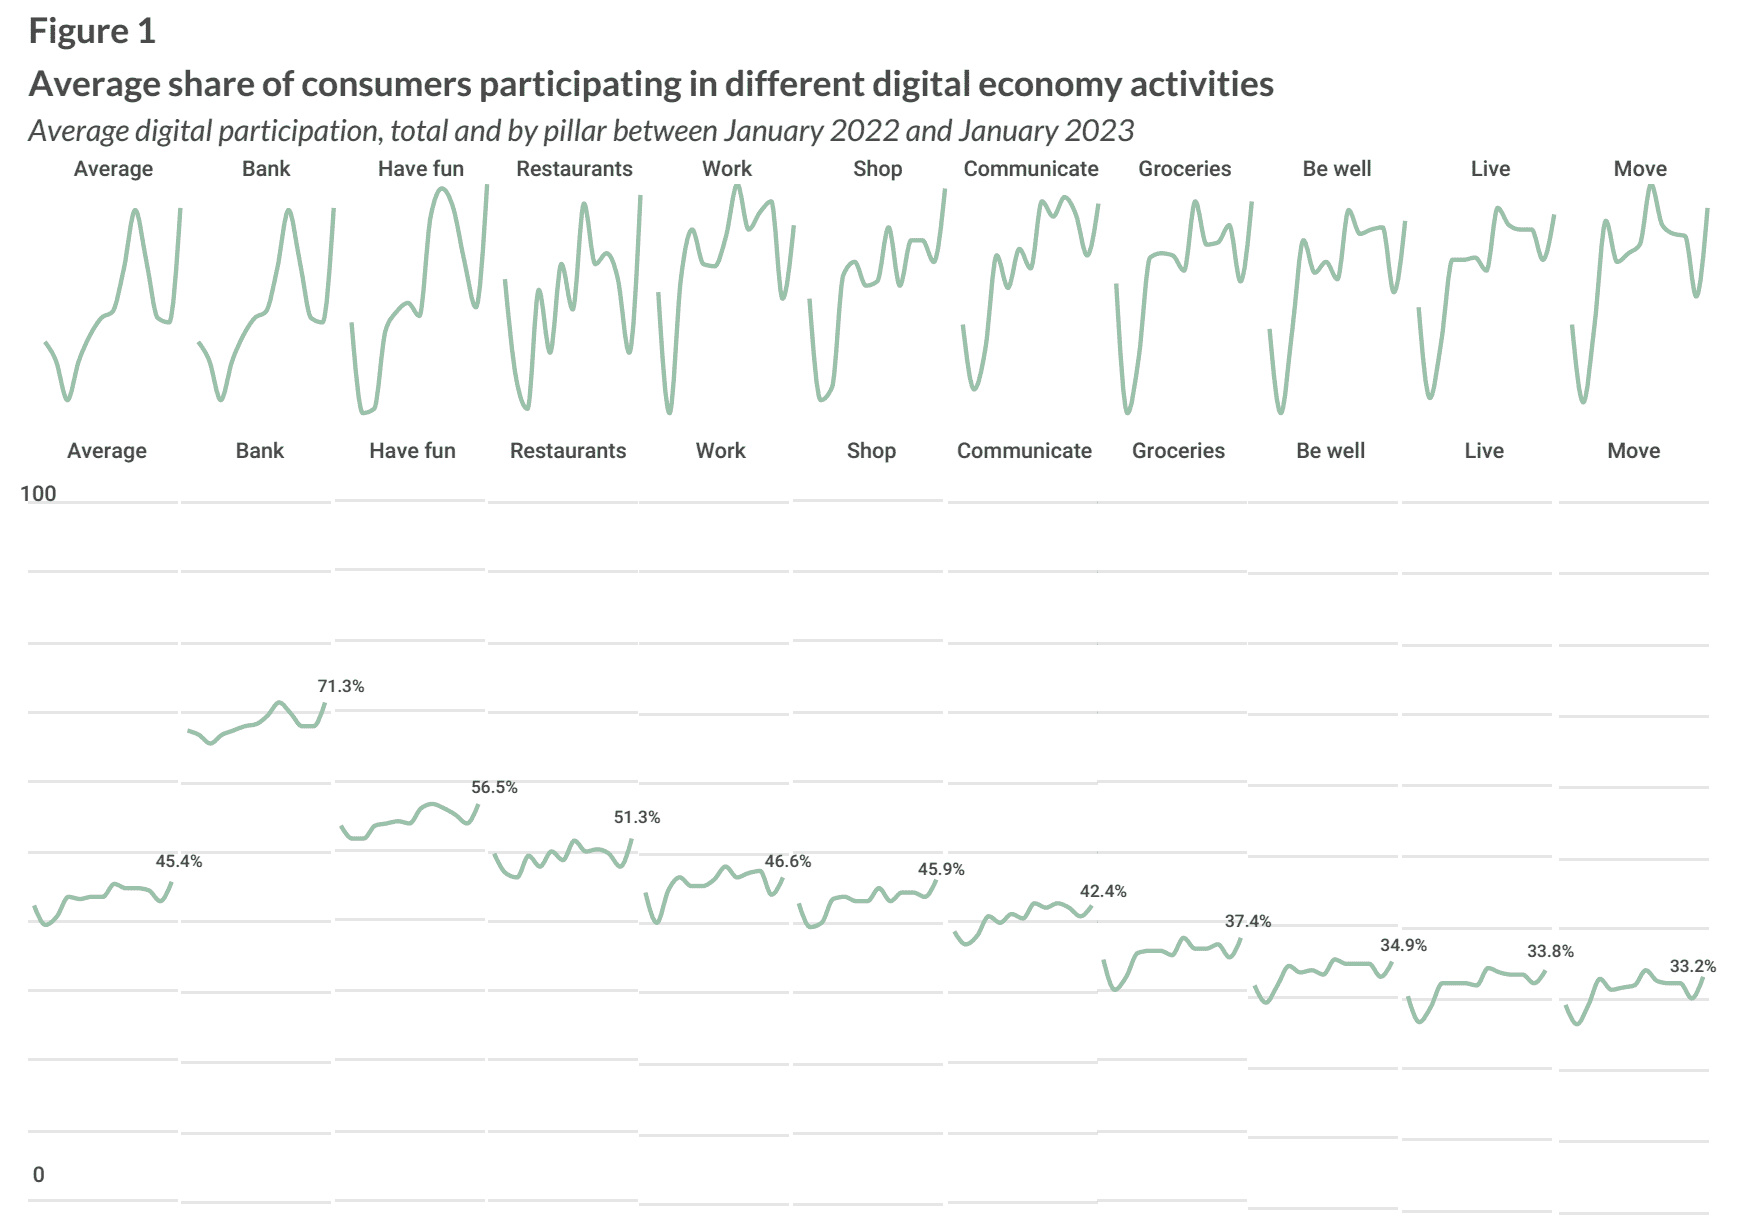 Average share of consumers participating in different digital economy activities